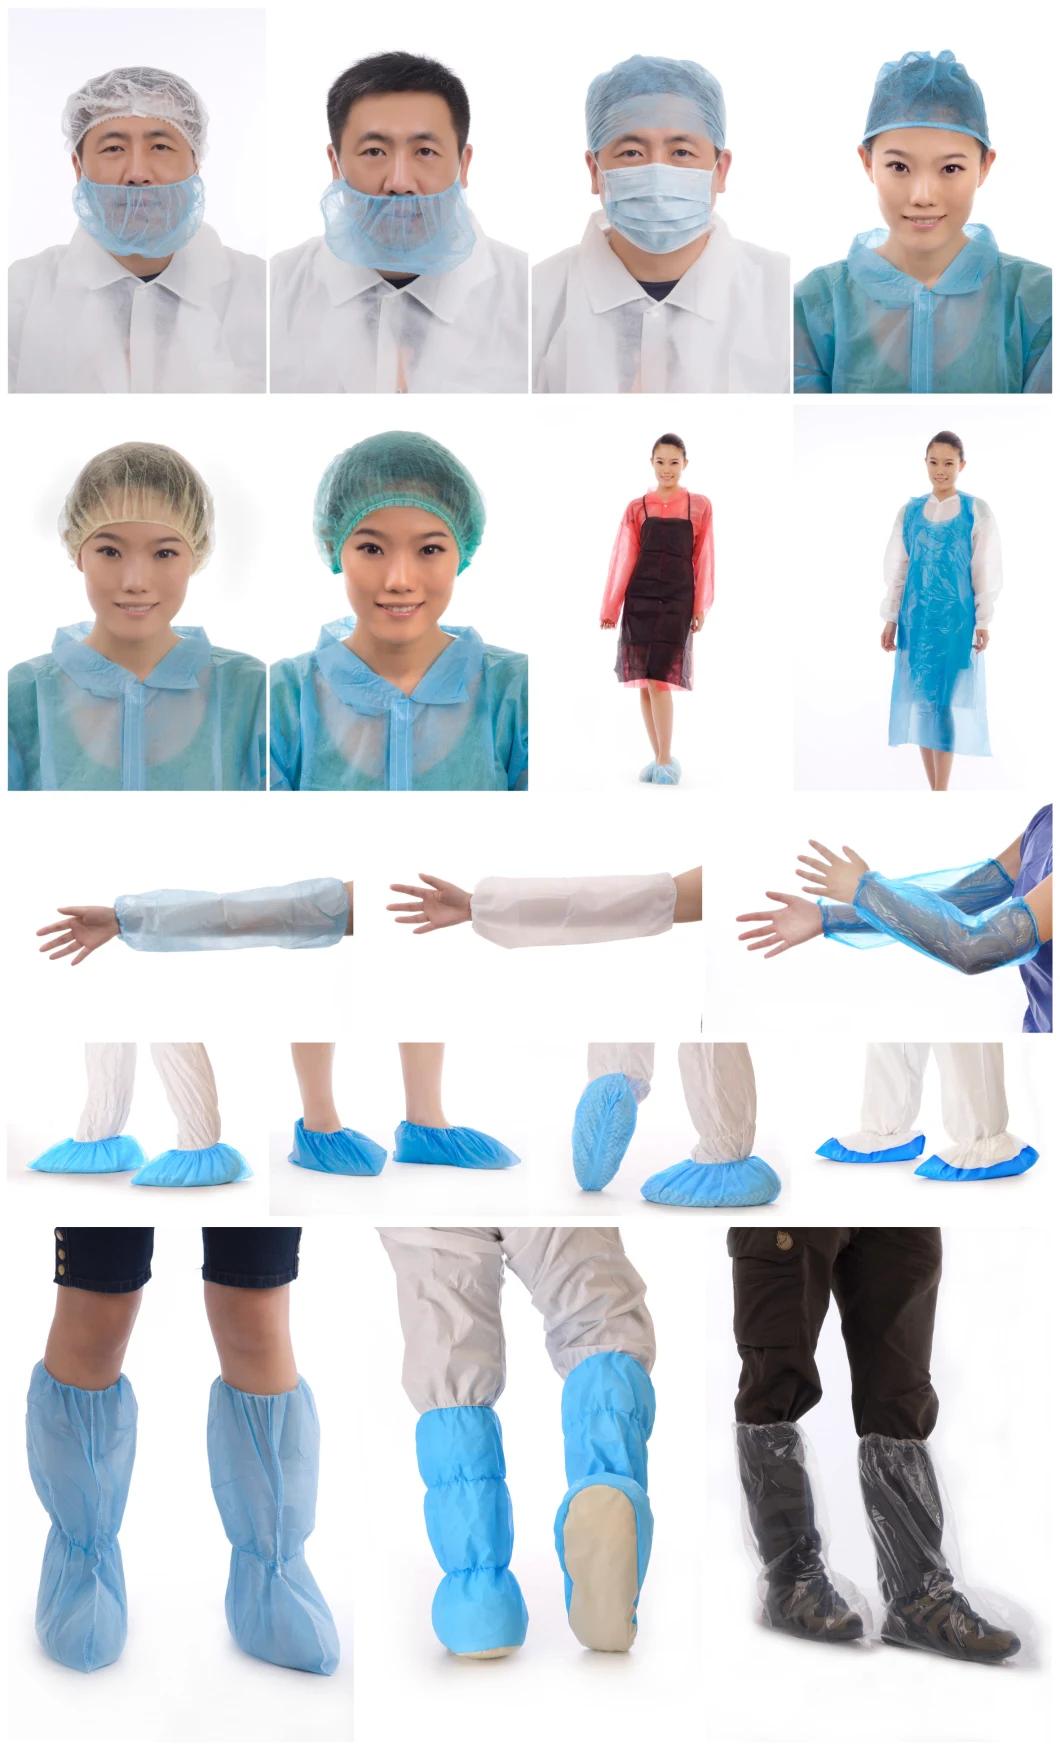 Single Medical Use Non-Woven Bedsheet for Avoid Cross Infection in Medical Environment